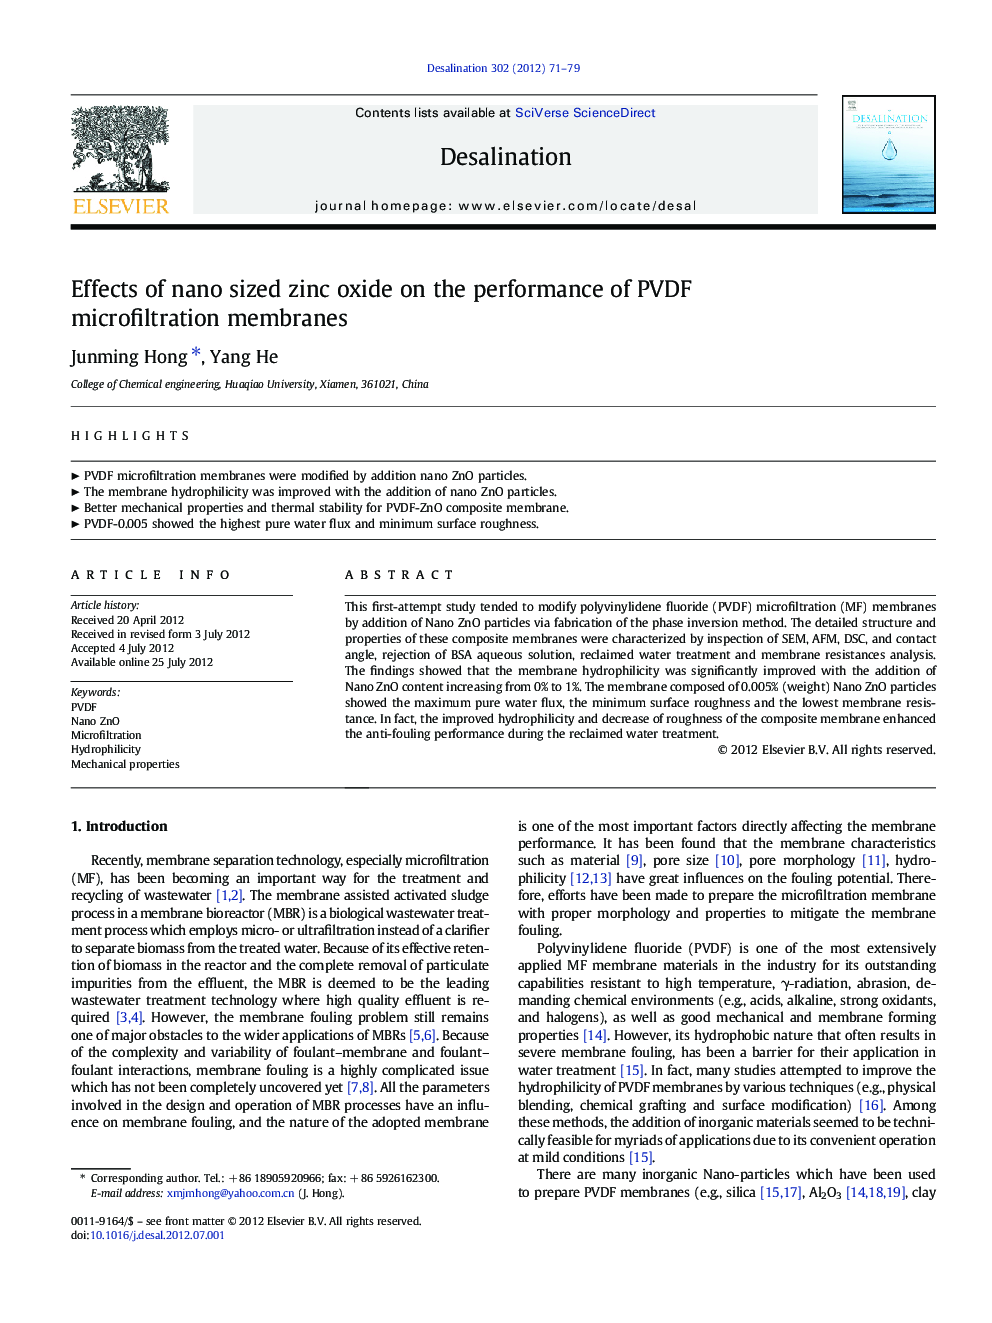 Effects of nano sized zinc oxide on the performance of PVDF microfiltration membranes